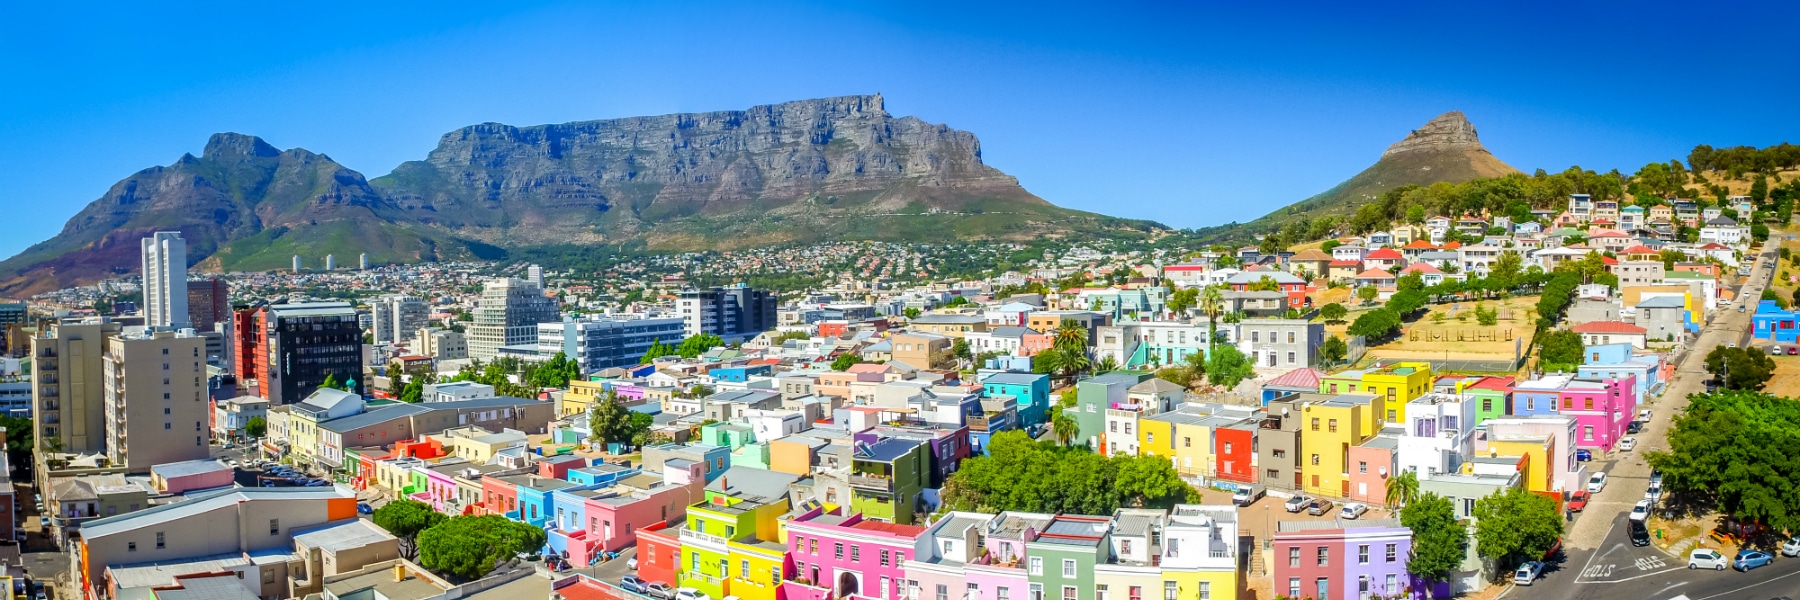 Reasons for Doing a Communications Internship in Cape Town